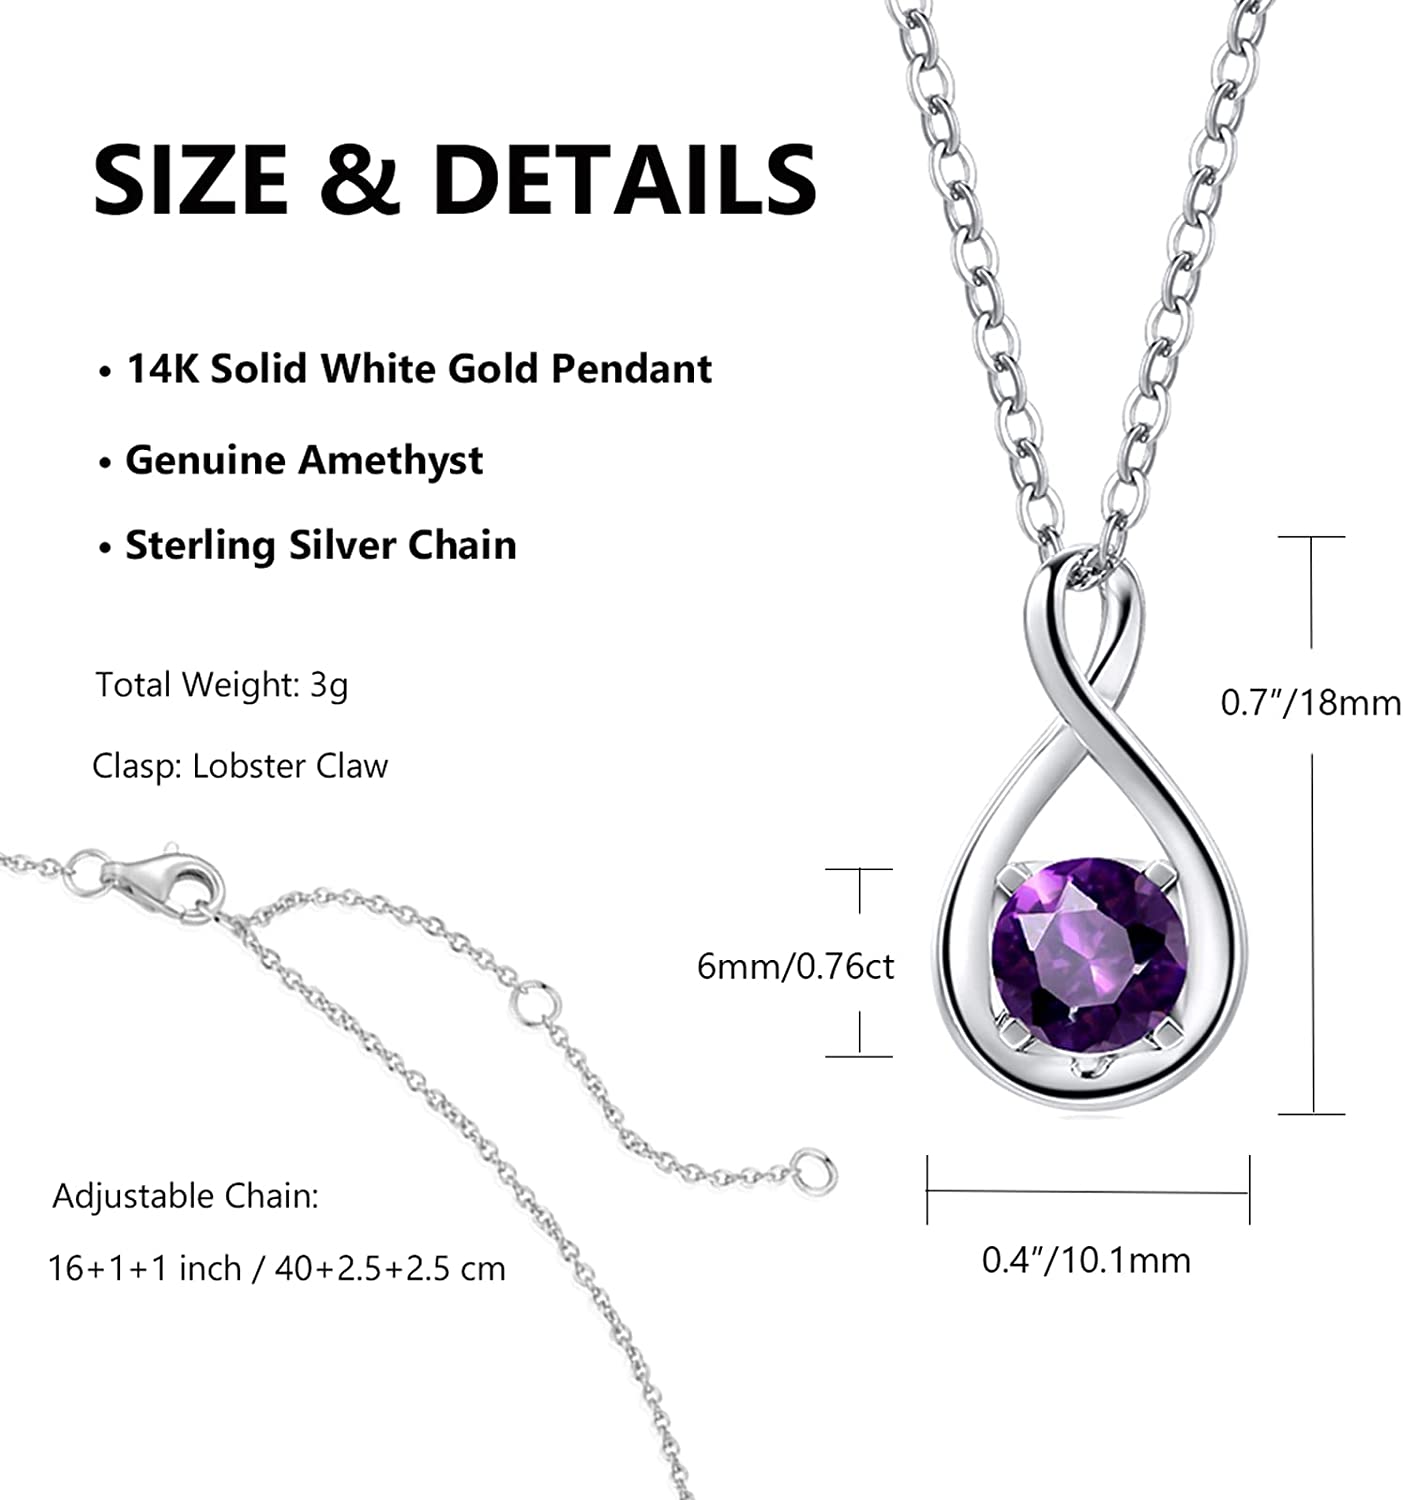 FANCIME Amethyst February Gemstone Sterling Silver Necklace Size